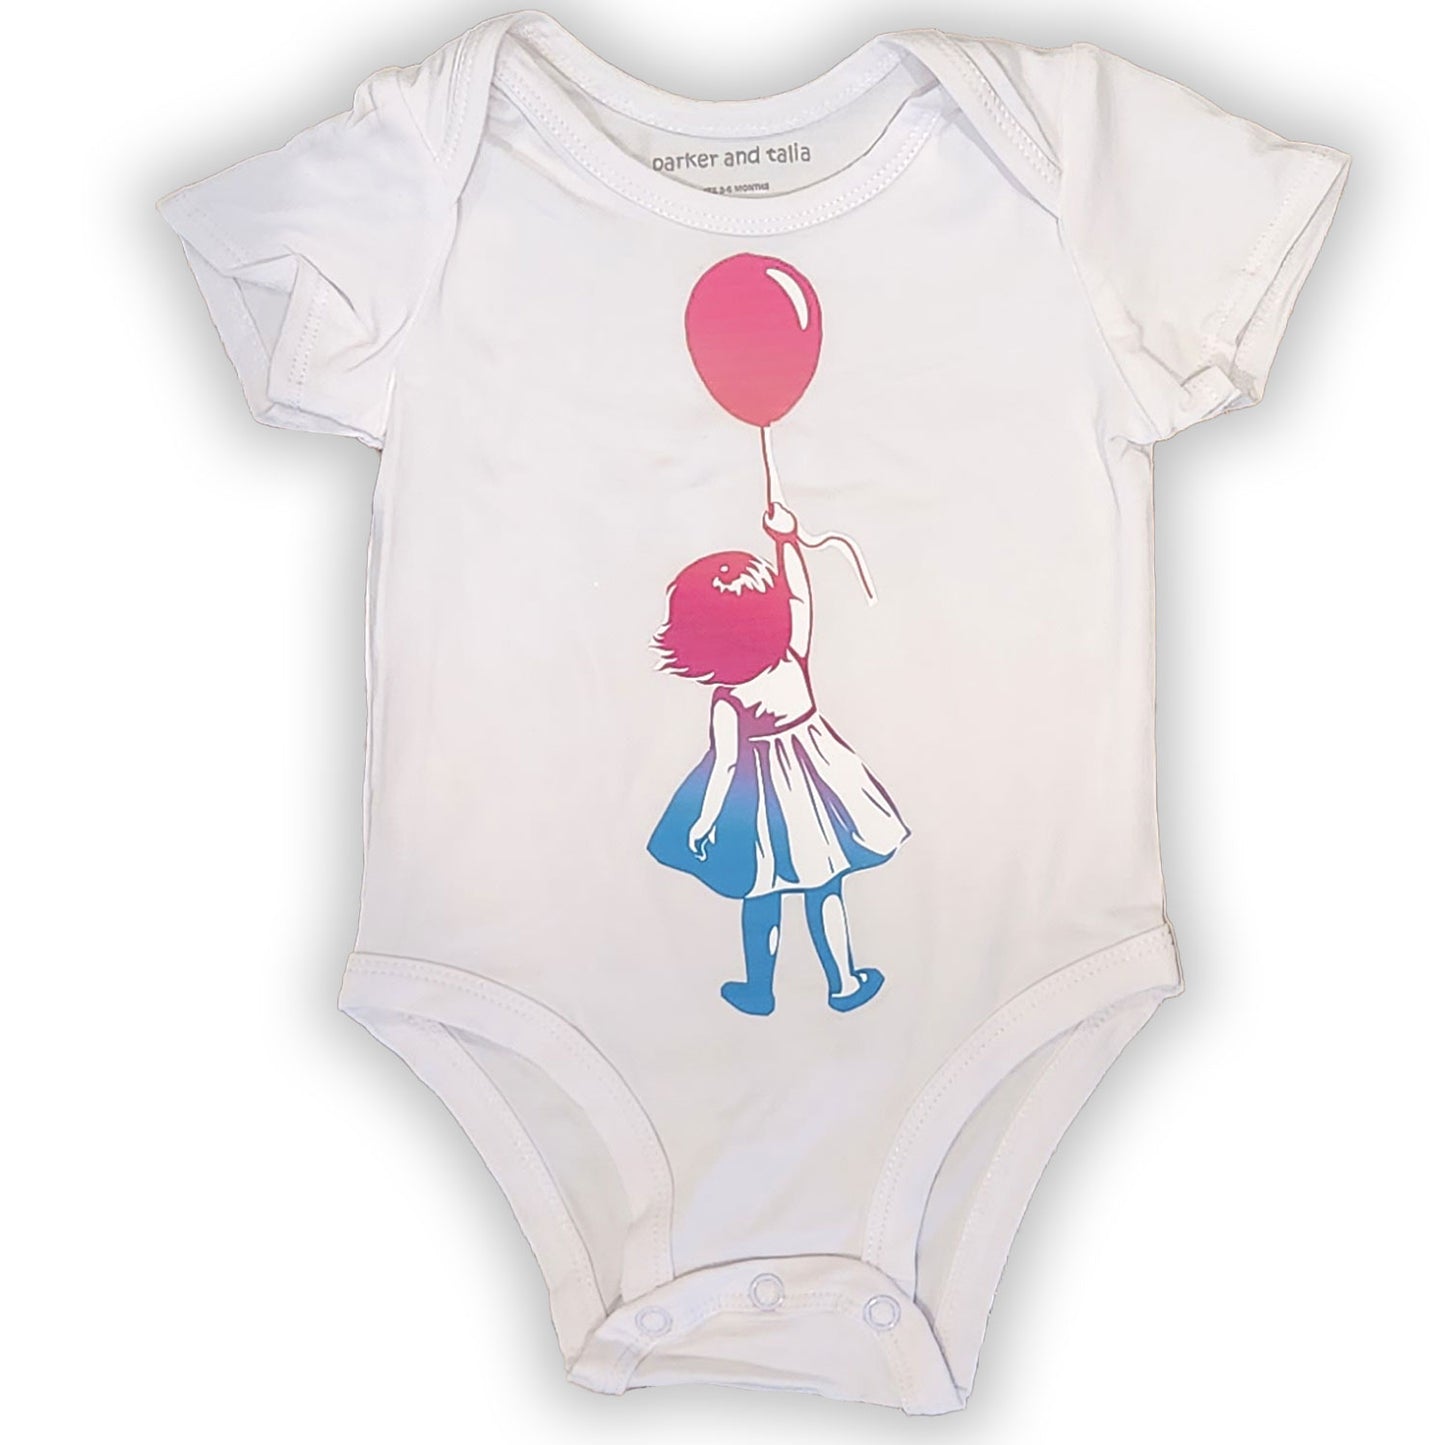 The Everyday Graphic Baby Onesie: Girl with a Balloon